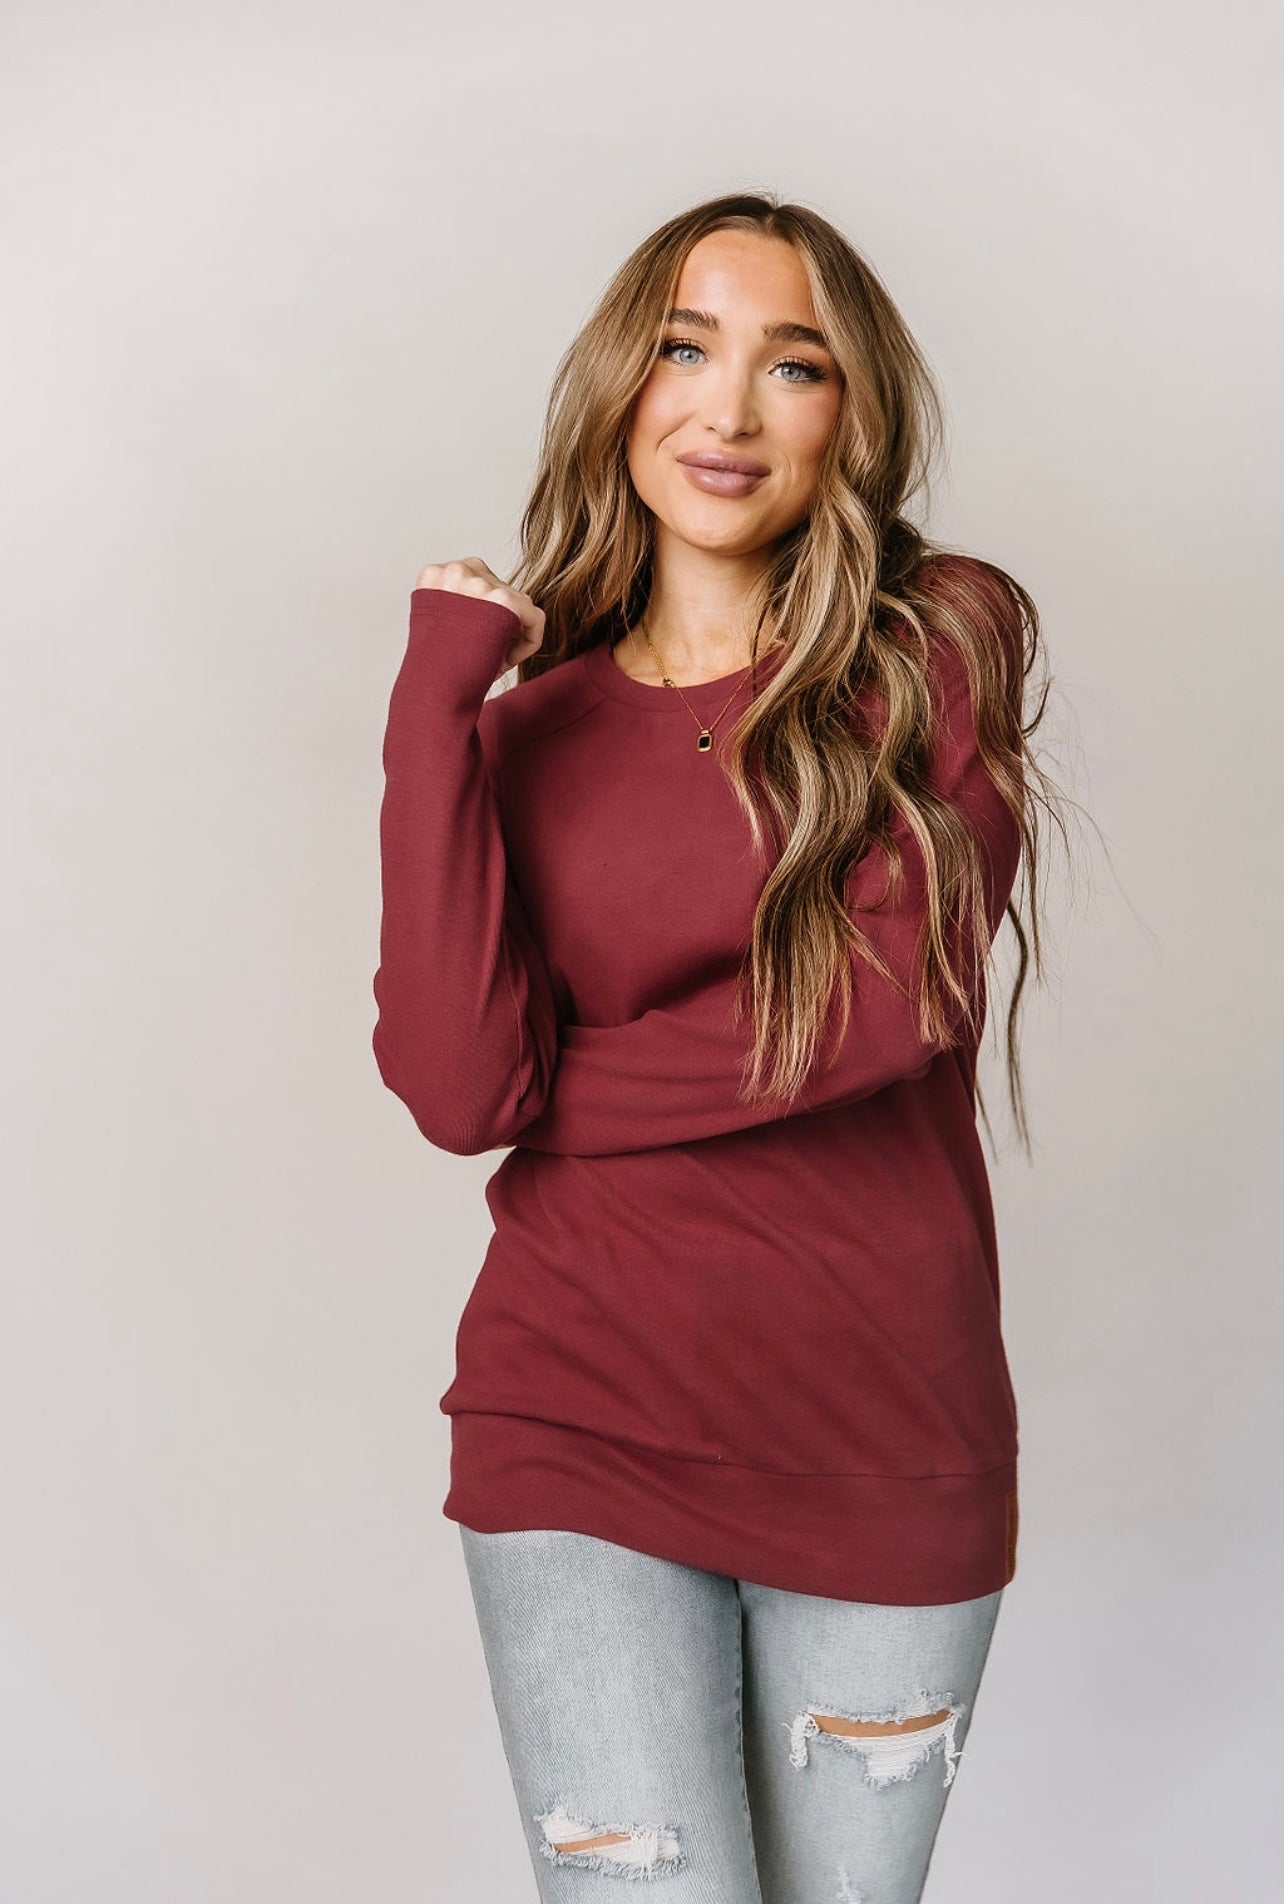 & Ave- Classic Pull Over- Cranberry- 3XL left